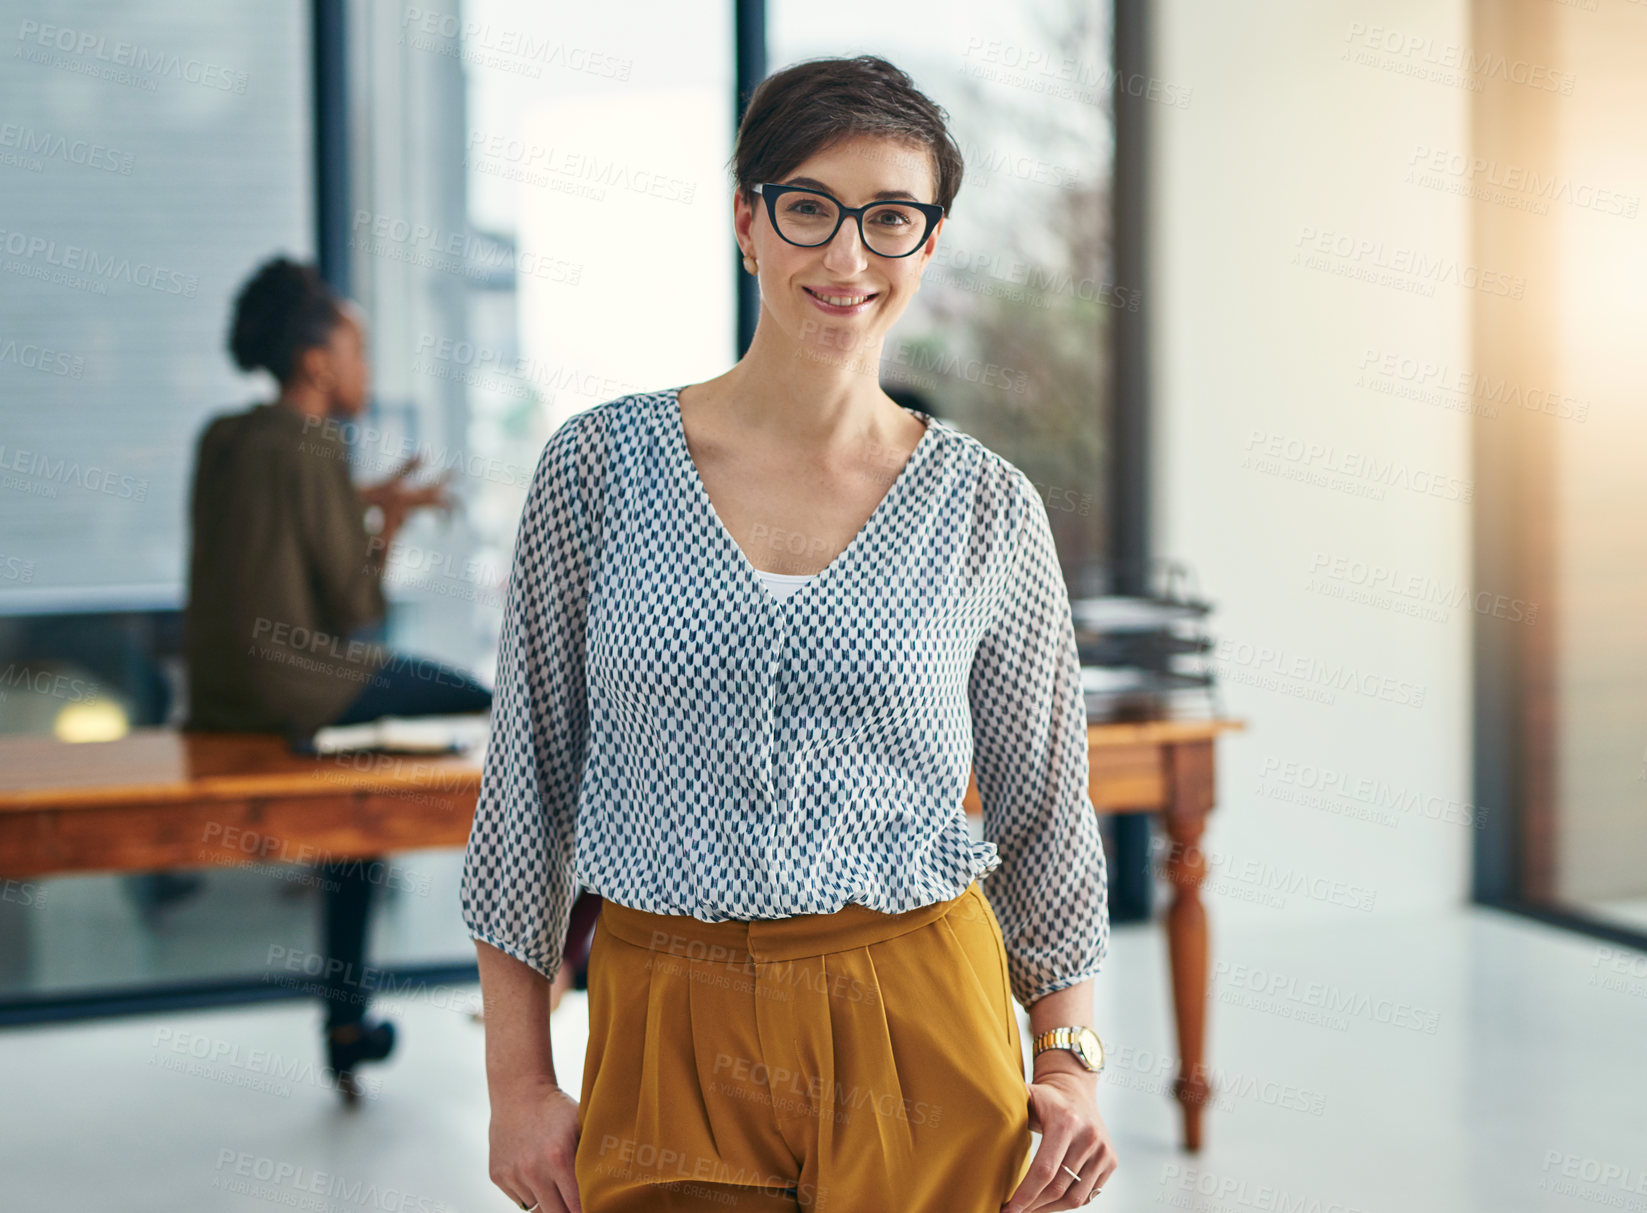 Buy stock photo Portrait of a young creative standing in an office with colleagues in the background